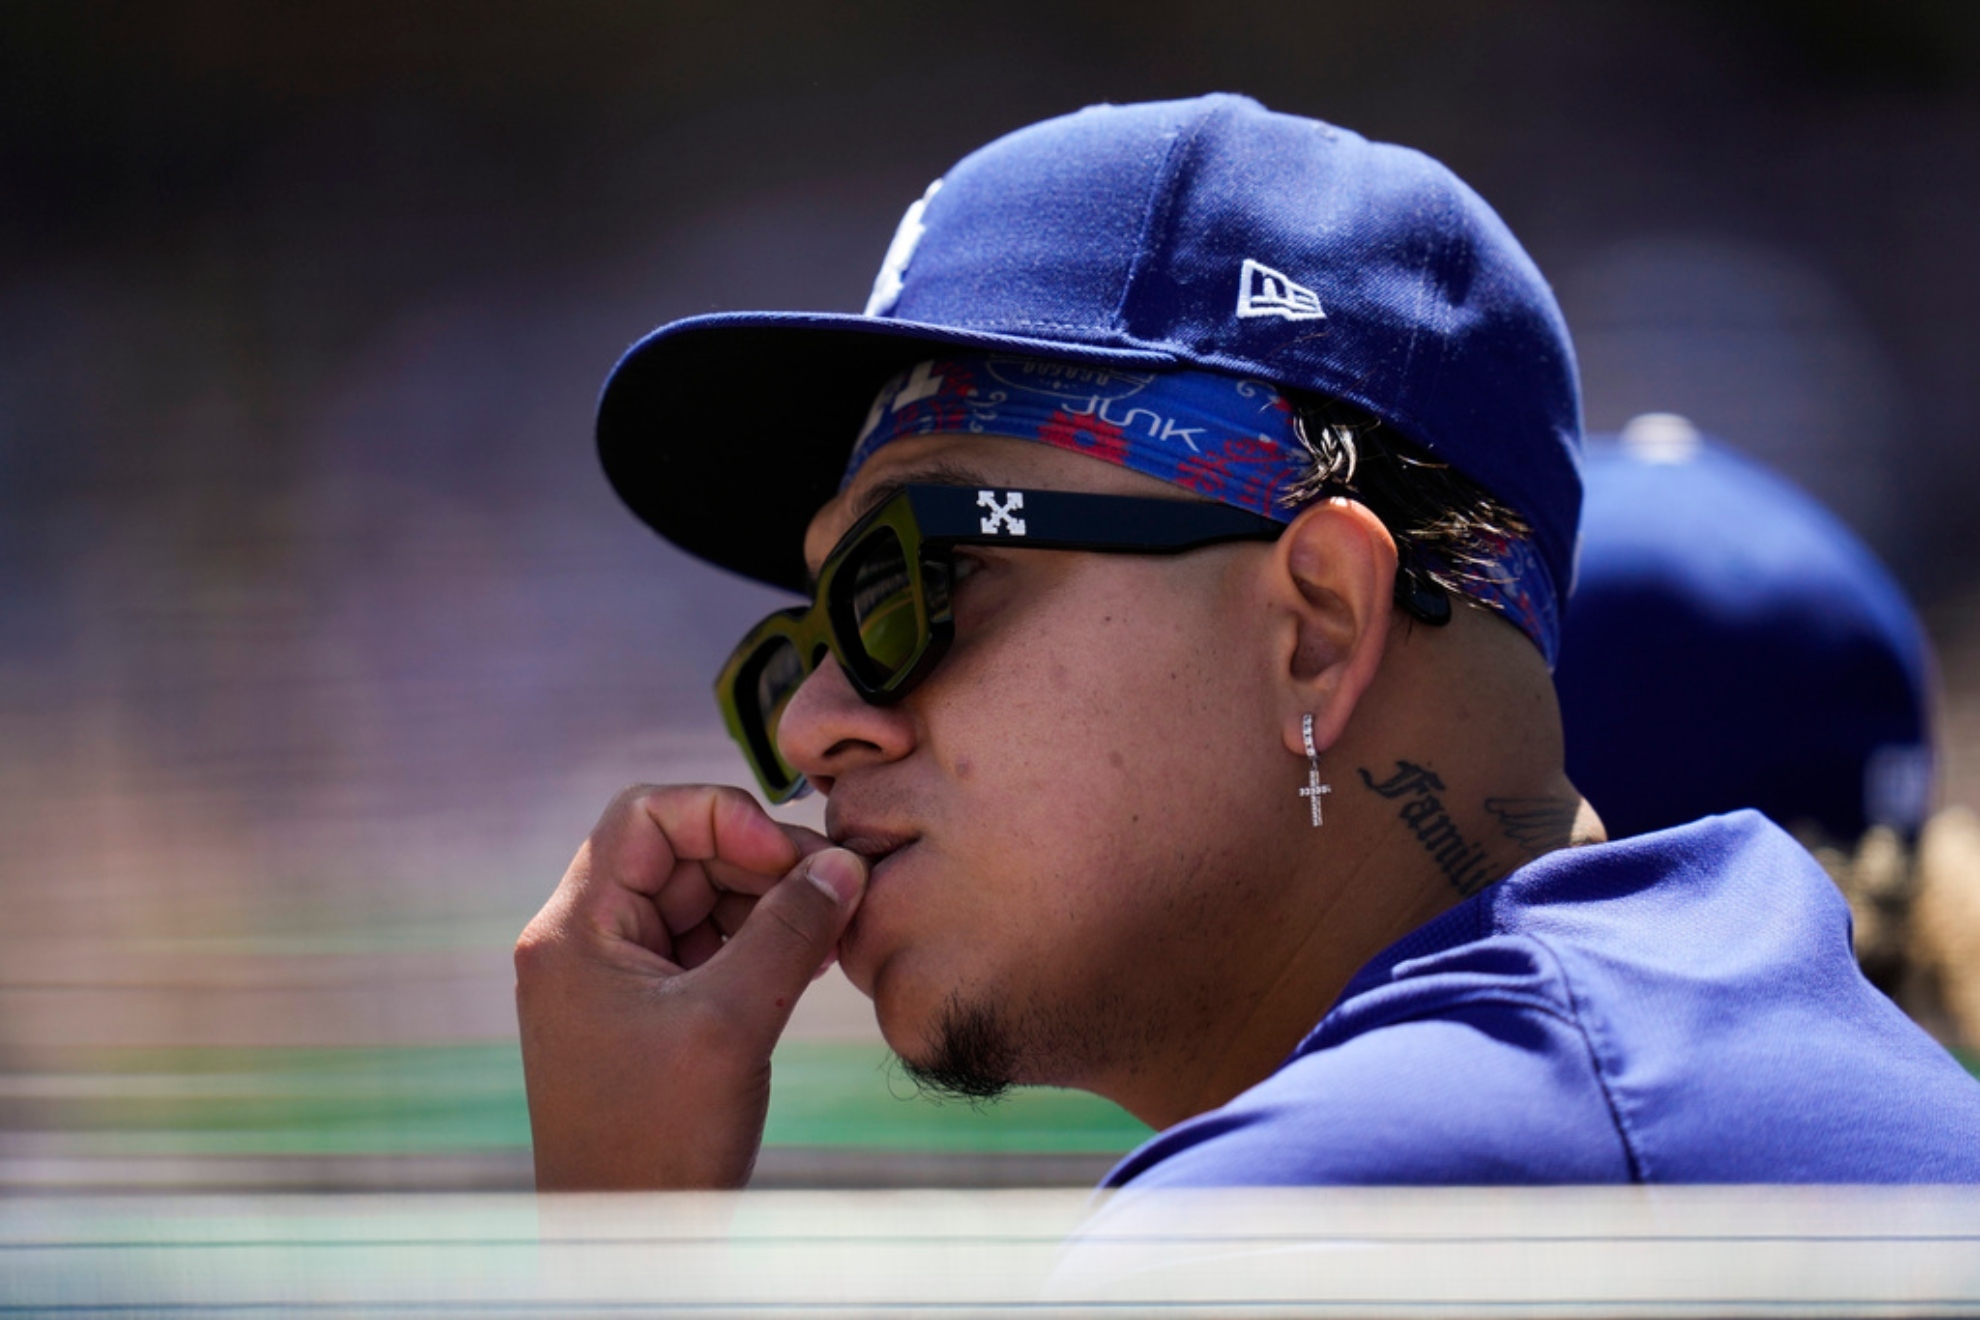 Los Angeles Dodgers send Julio Urias a clear message with locker